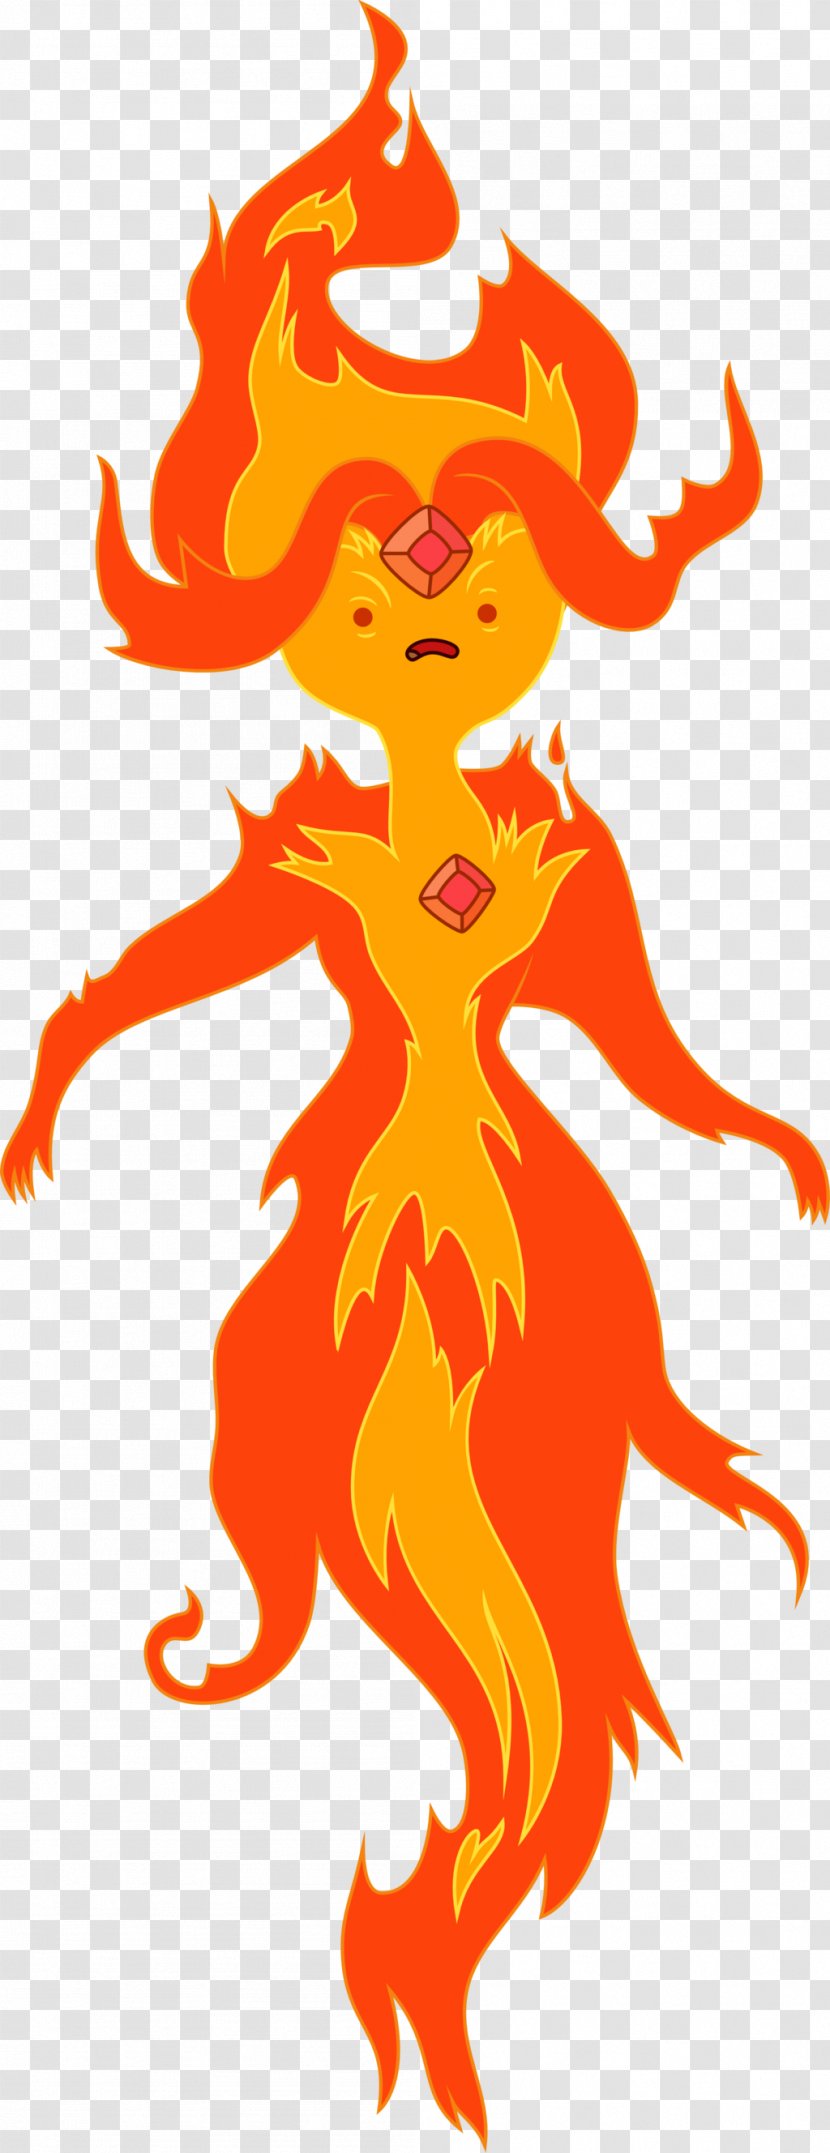 Finn The Human Flame Princess Ice King Sticker - Fictional Character Transparent PNG